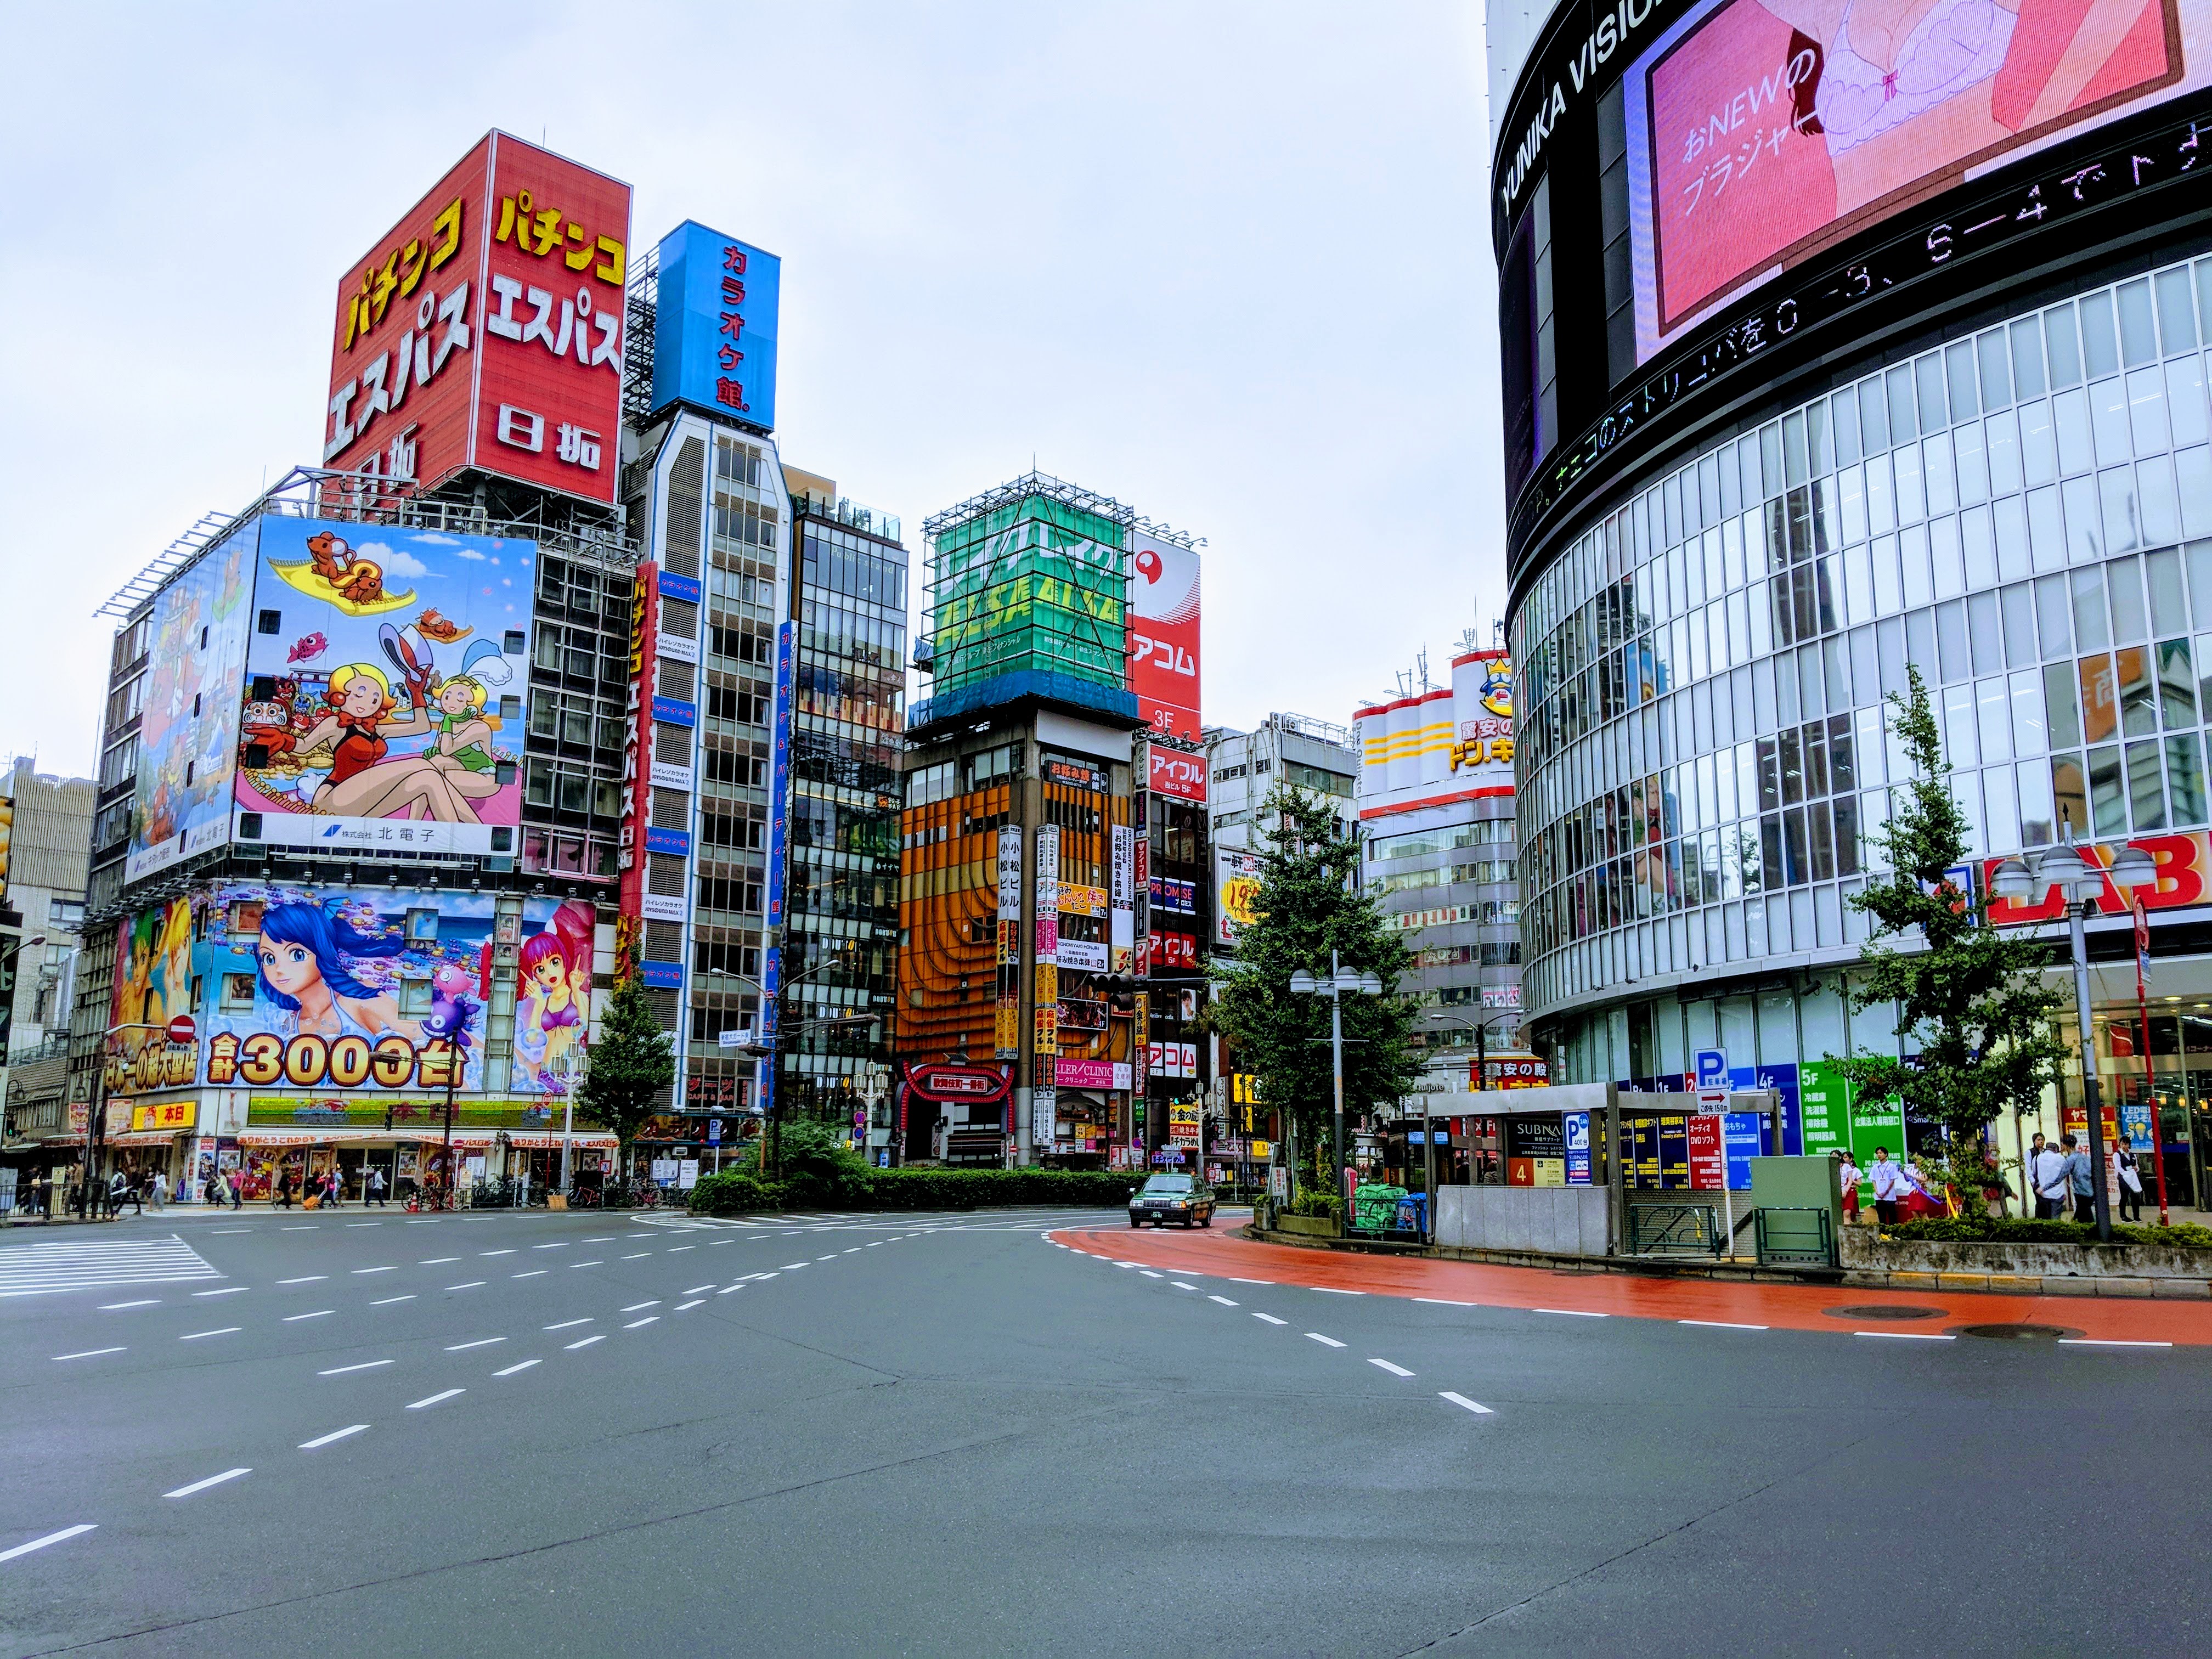 A busy intersection in Tokyo is written. There are two billboards and a giant sign on the left. The sign is atop a 9 story building and is probably 6 stories tall. It has three lines of text in Japanese. The two billboards below it have cartoonish people and animals. More bright signs and text are on all the remaining buildings. There is a lot of blue, red, orange, and green. There is only one car on the road and fewer than 20 small people on the sidewalks.